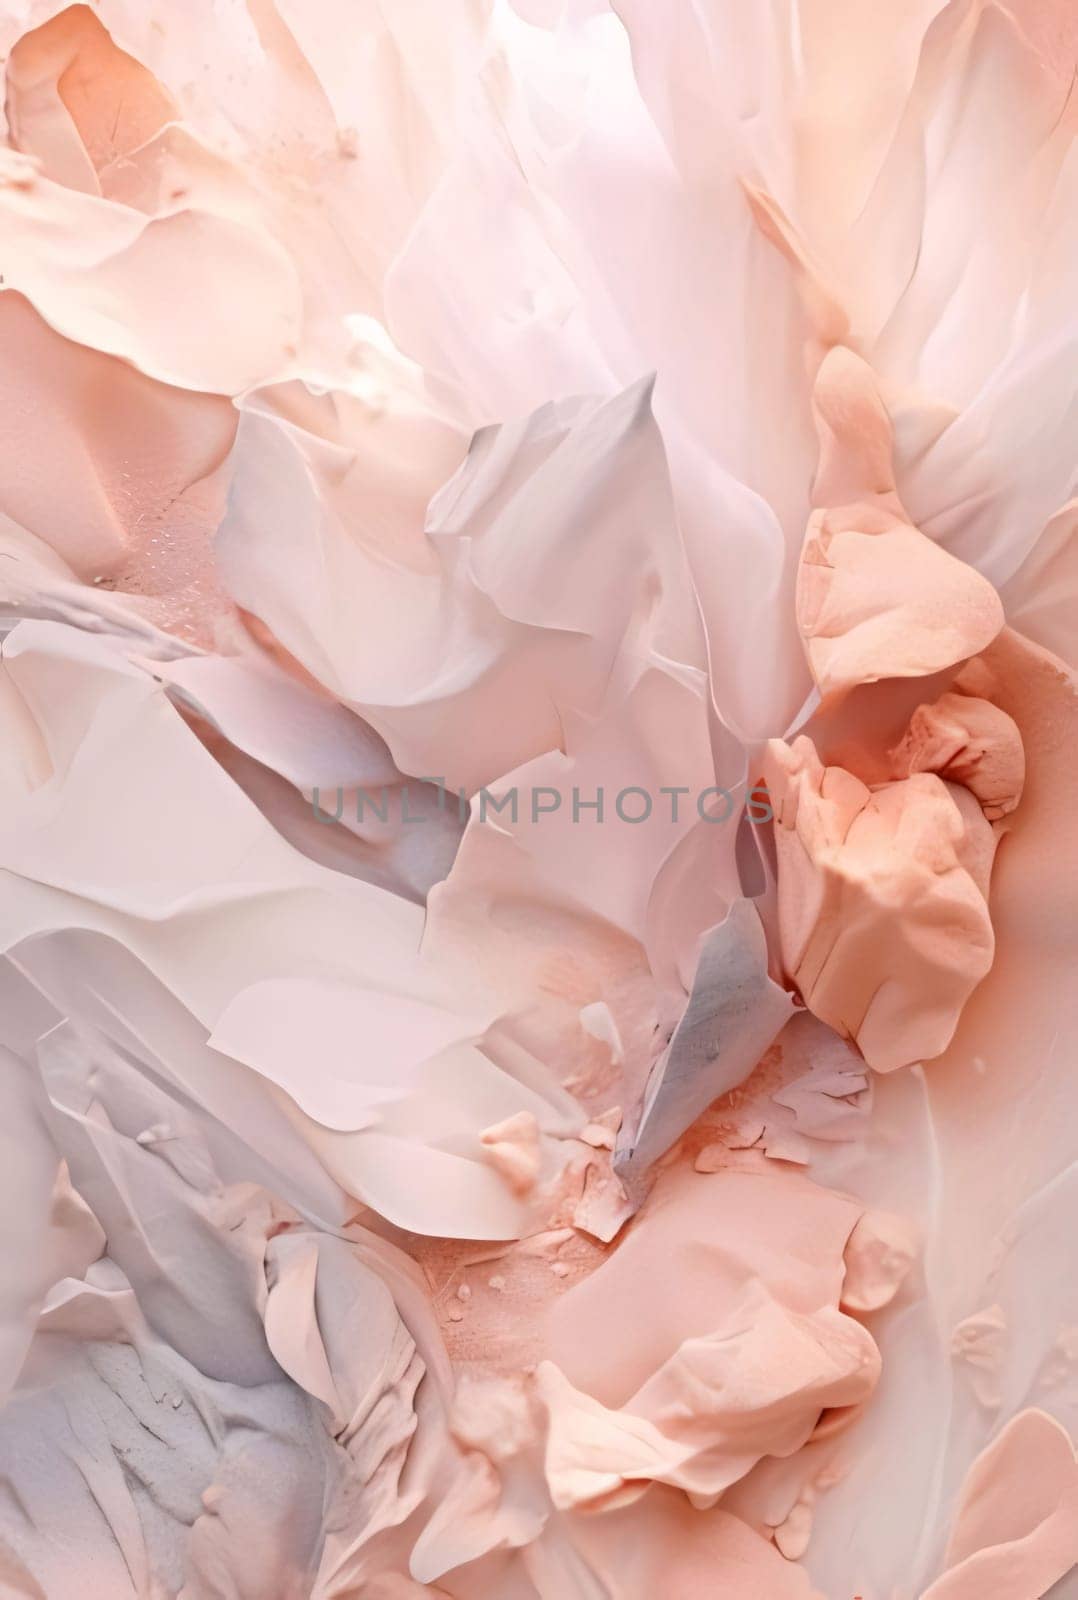 Abstract background design: Crumpled paper background. Crumpled pink paper texture.